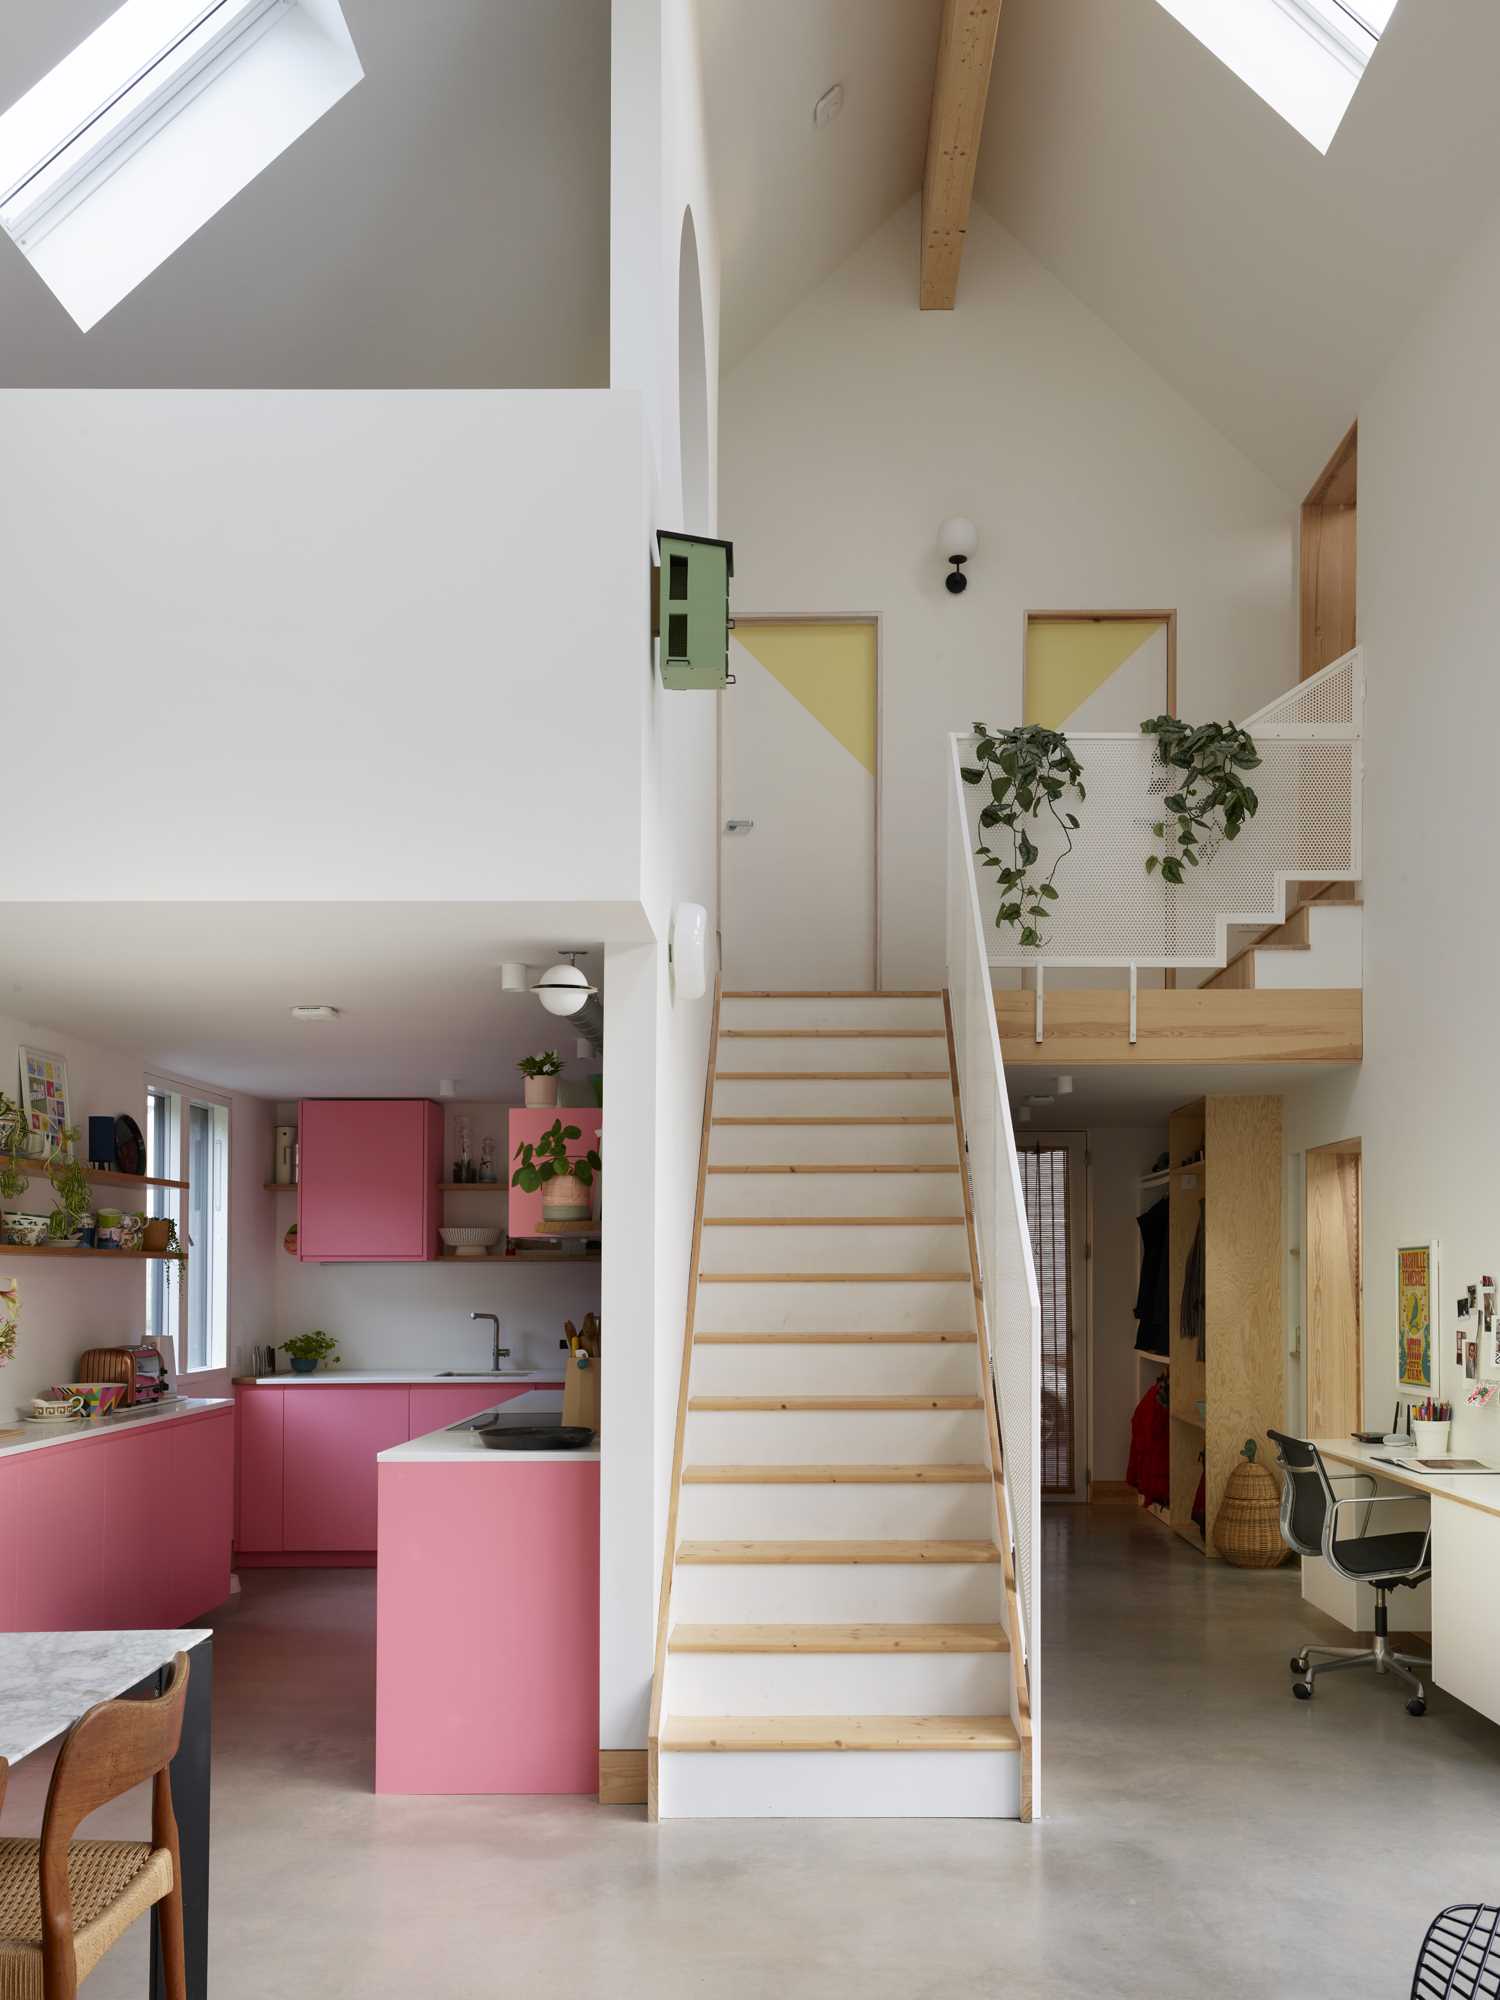 An unexpected design detail in this contemporary home is the kitchen with its pink cabinets, which are complemented by white countertops and floating wood shelves.